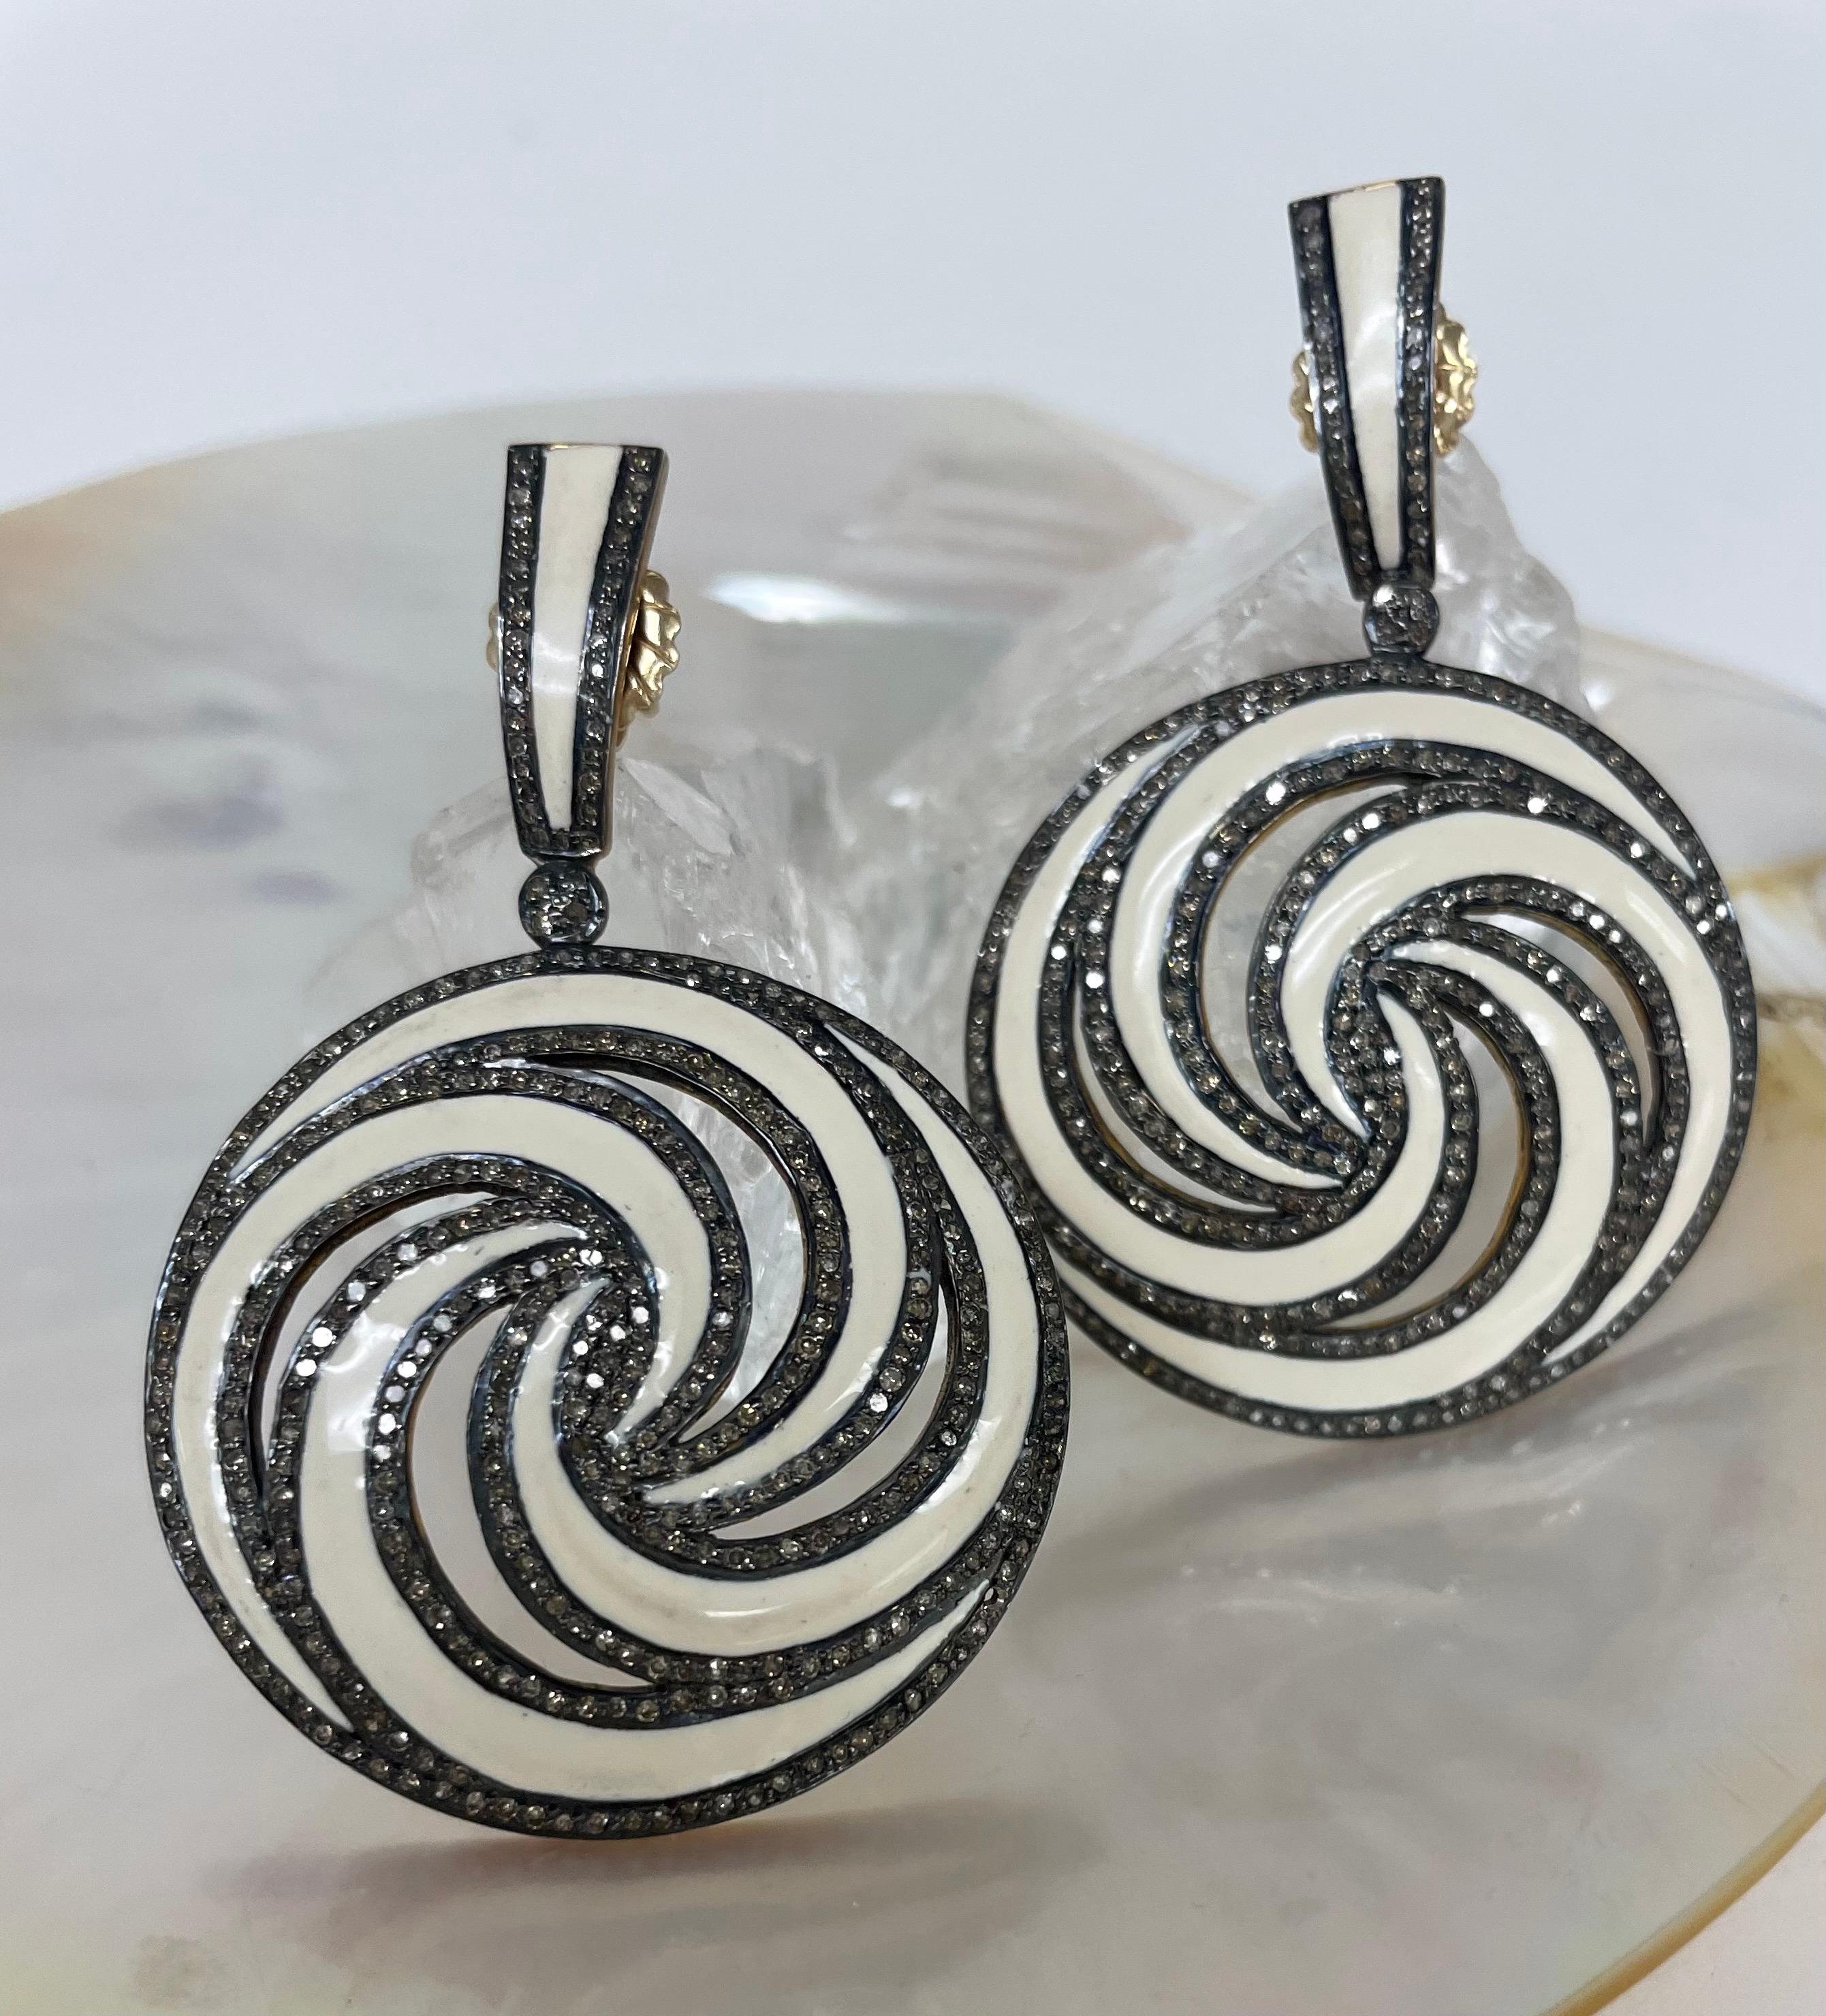 Description
Stylish enamel and pave diamond pinwheel design statement earrings.
Item # E2705

Materials and Weight
Ivory color Enamel 40 mm, round 
Pave diamonds 
Rhodium sterling silver
14k posts and jumbo backs

Dimensions 
Length 2 inches

Made